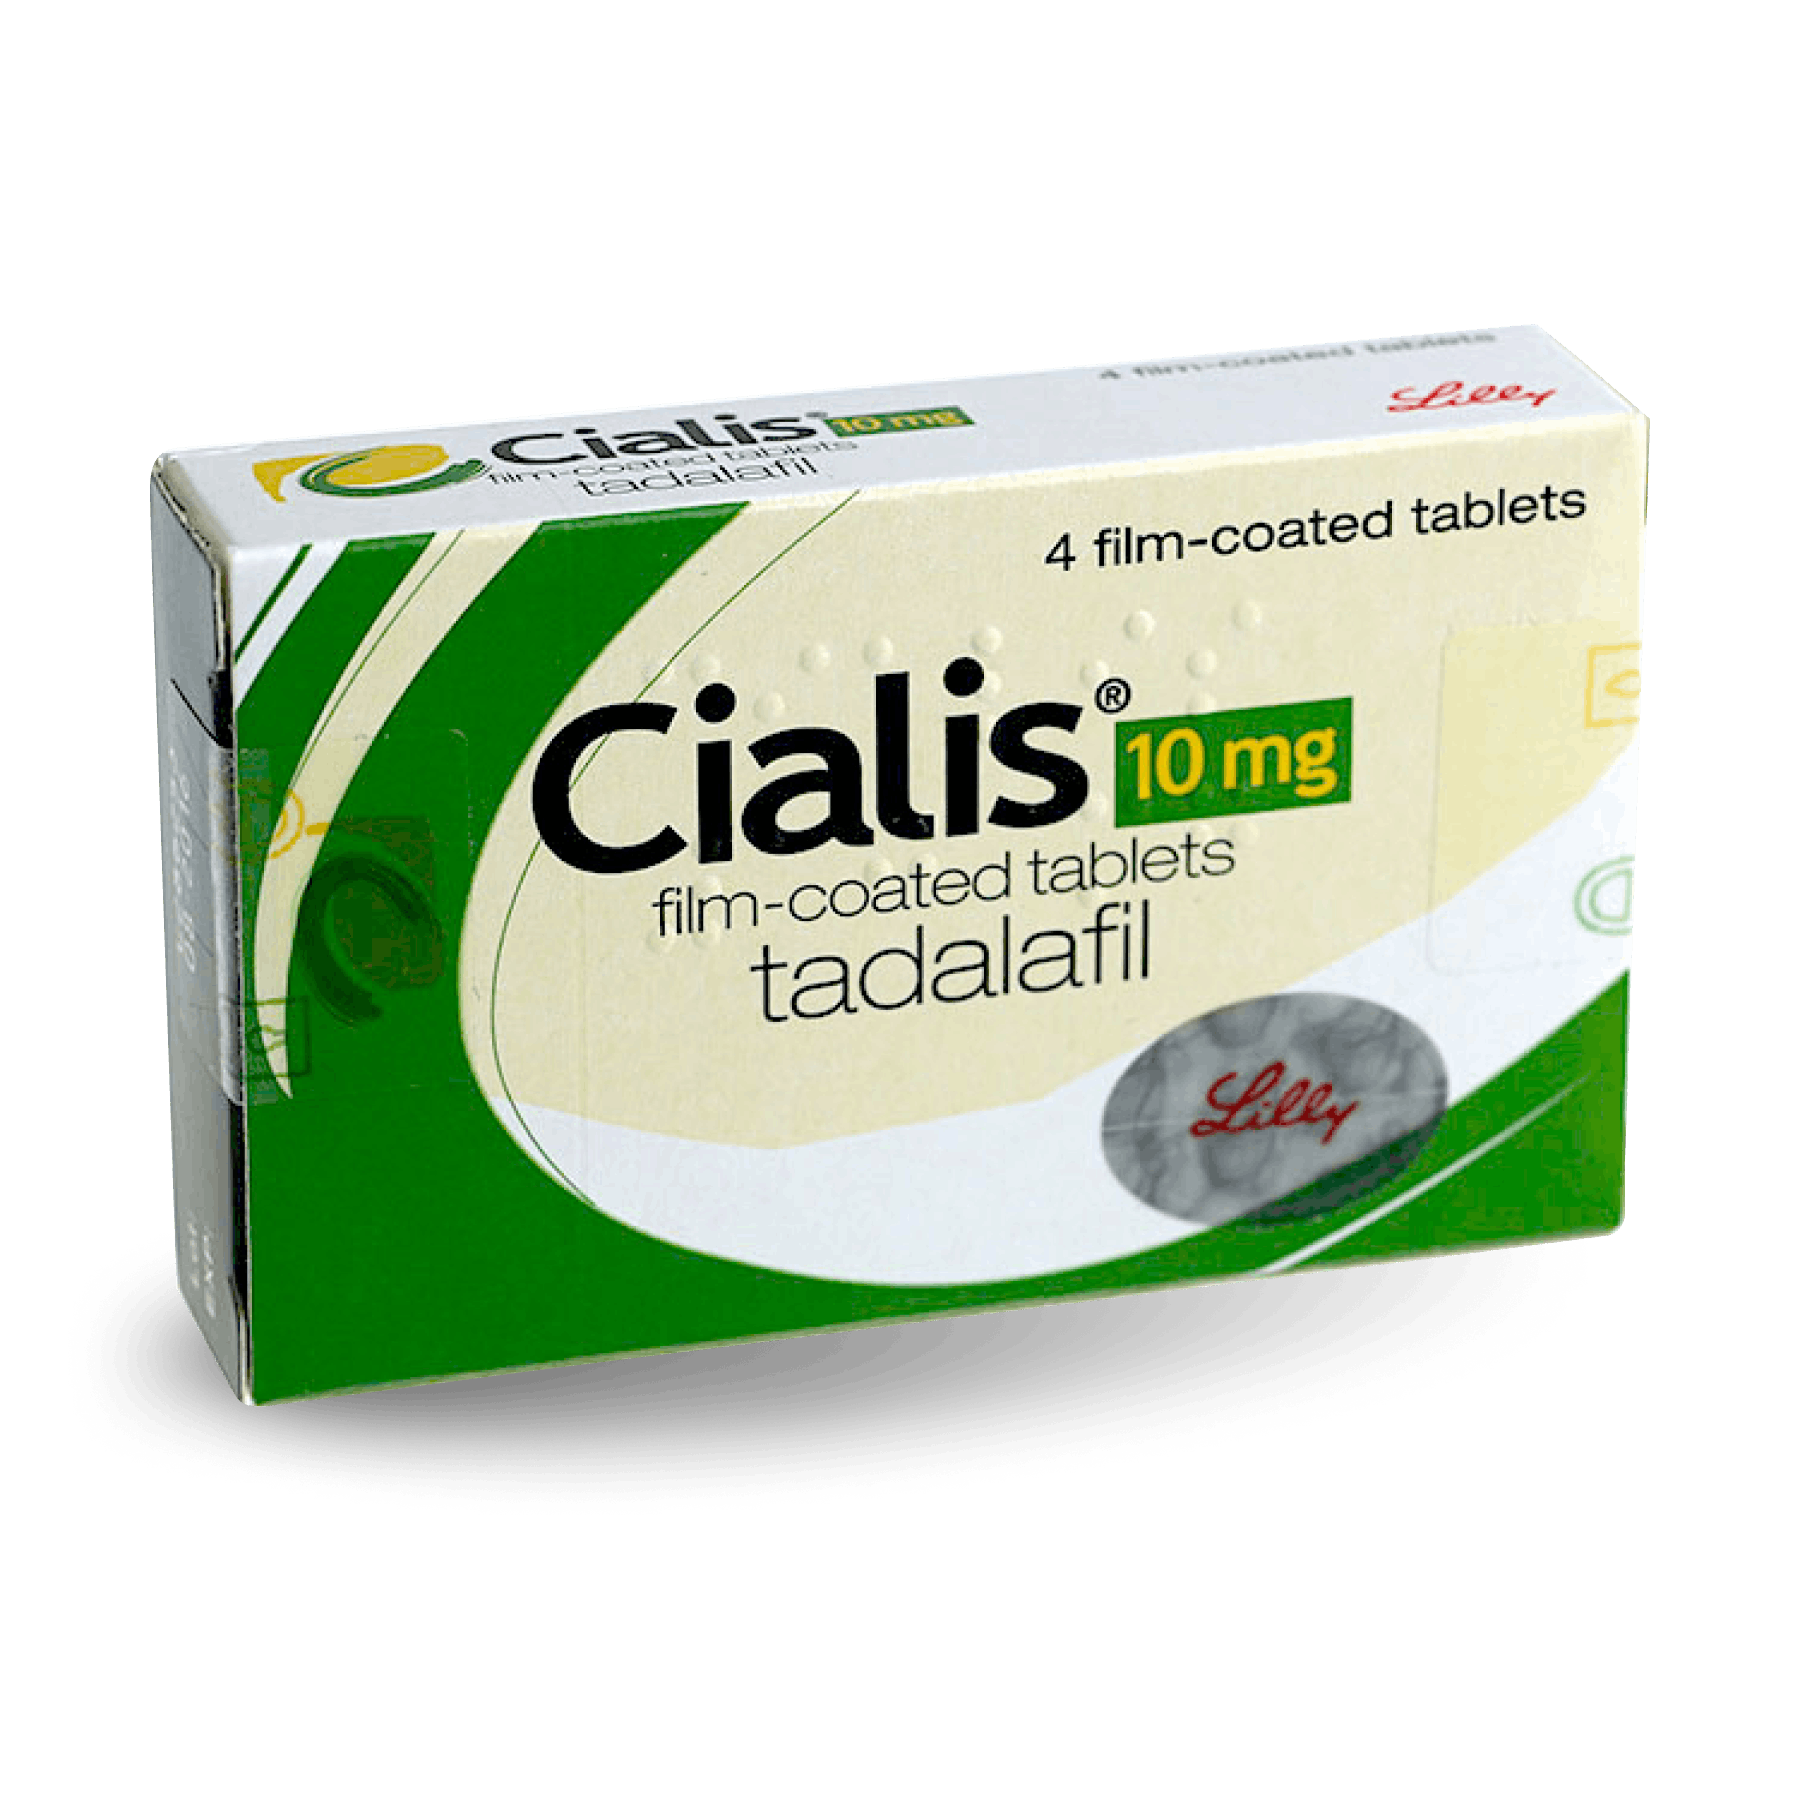 Cialis tablets | Buy Cialis online - Well Pharmacy